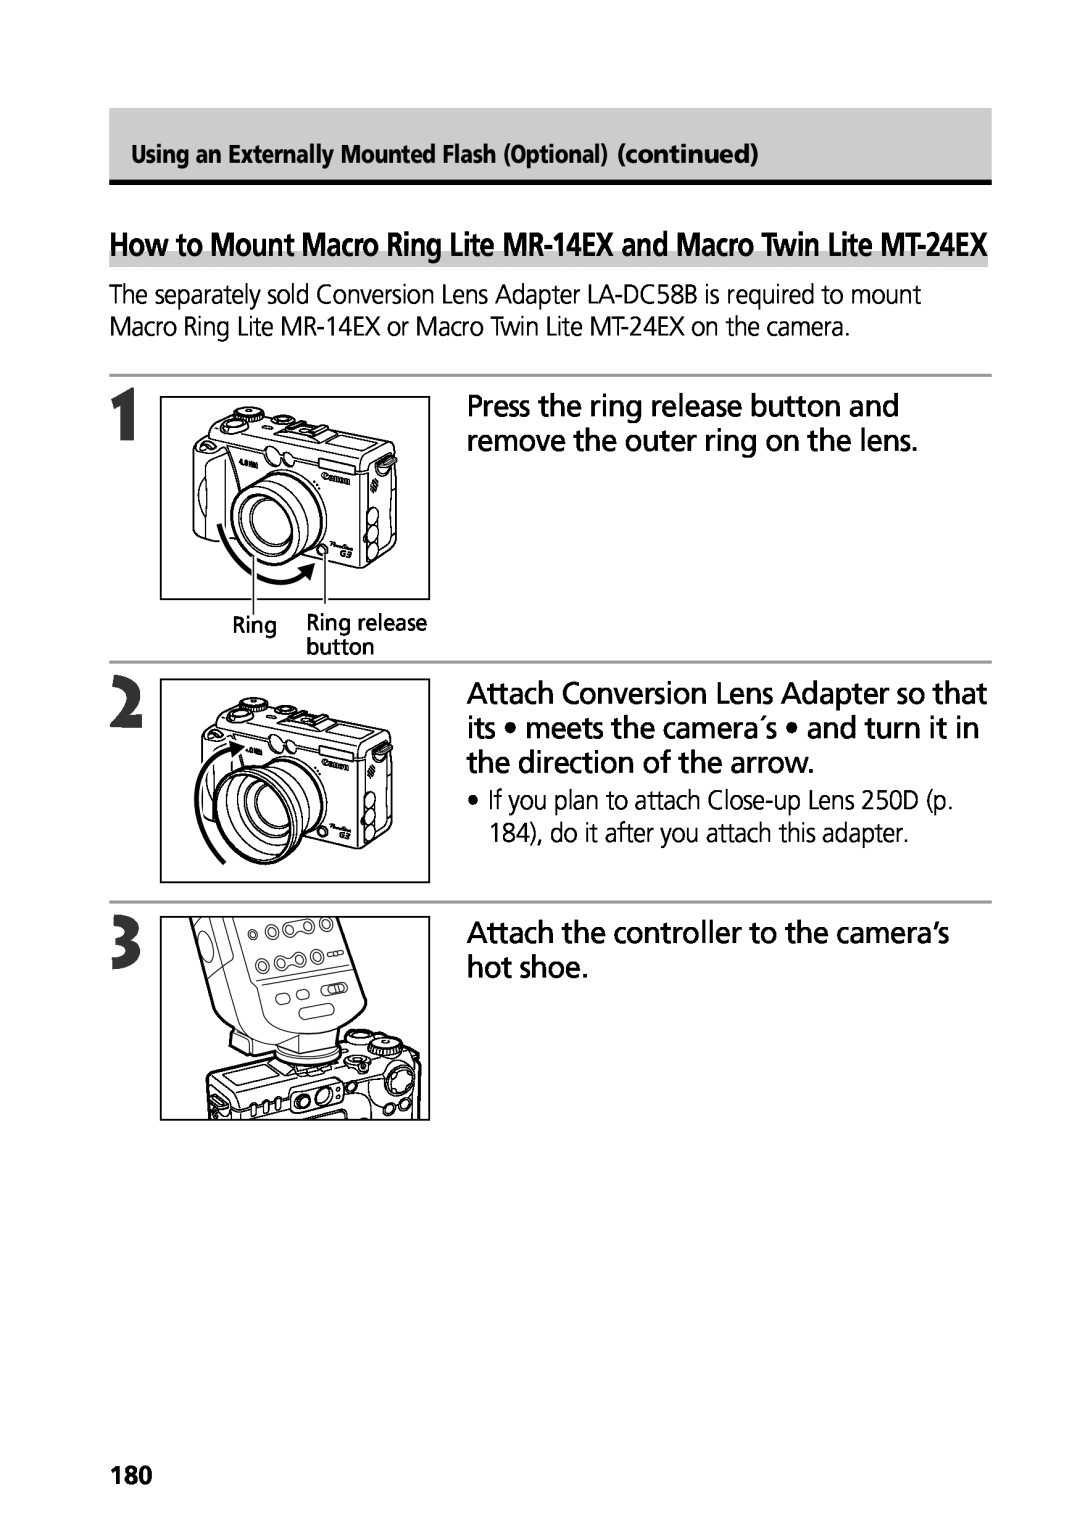 Canon G3 manual Press the ring release button and remove the outer ring on the lens 